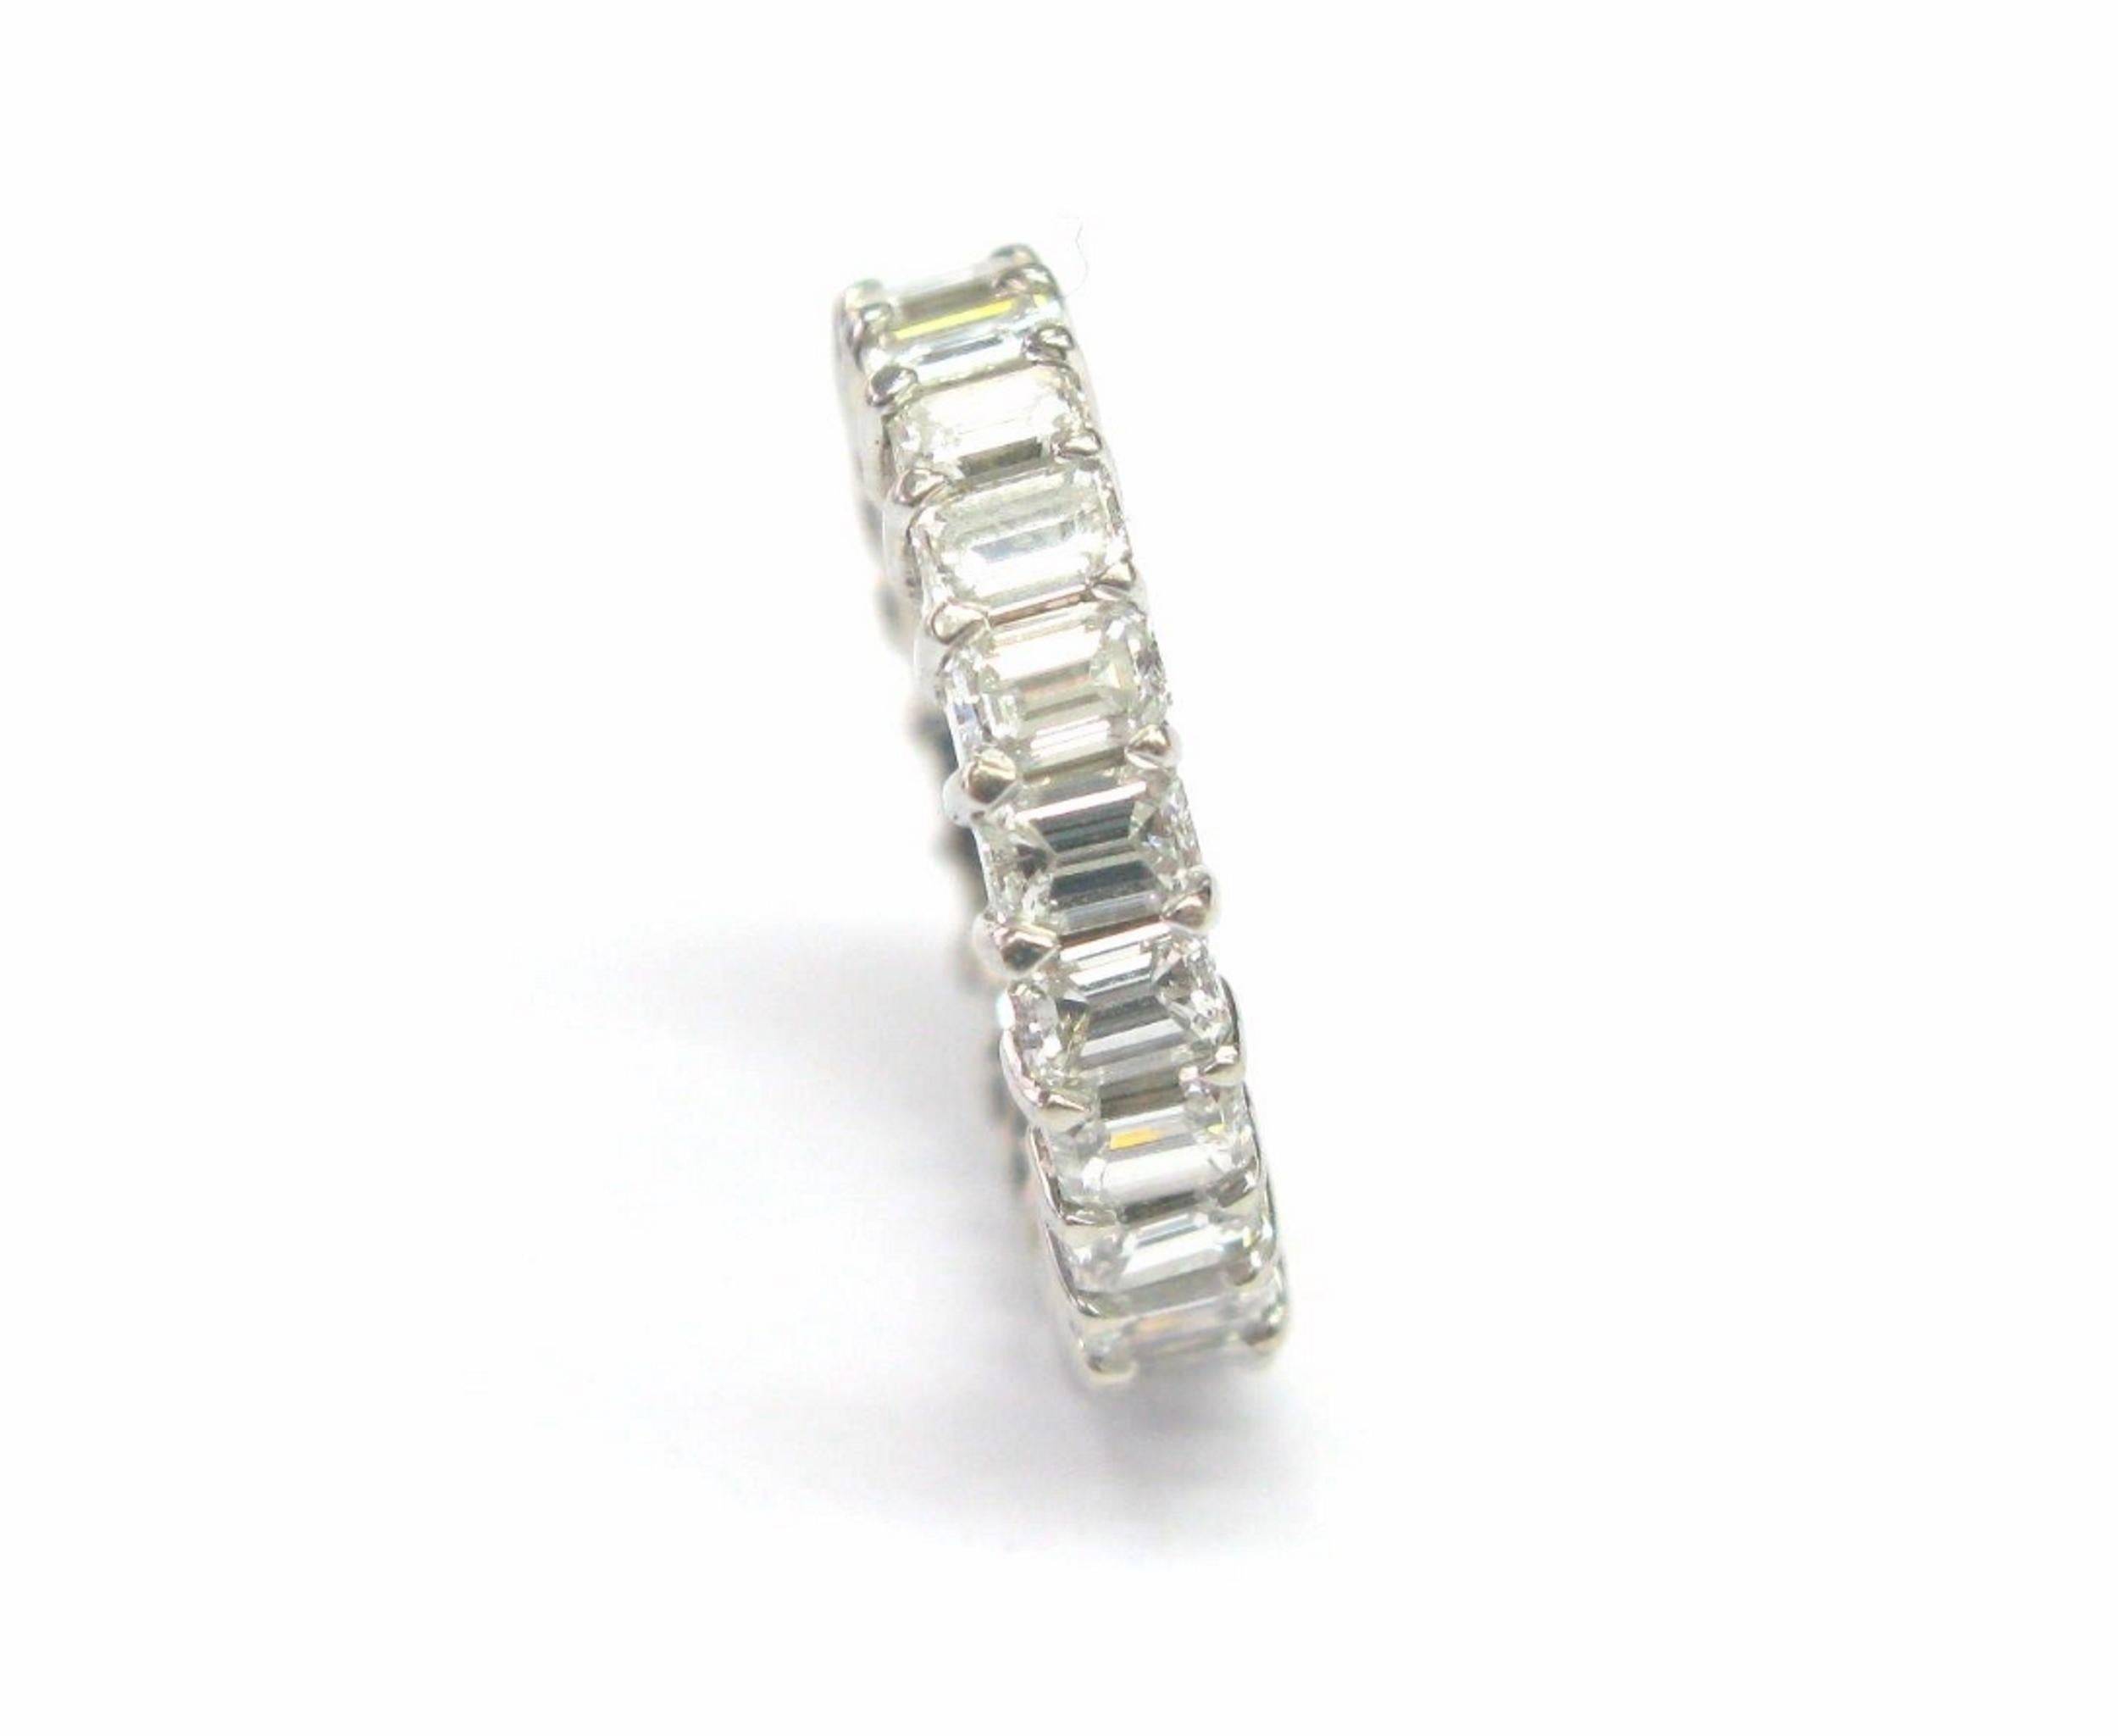 Eternity band shared tips with fine emerald cut diamond. 
Made of solid 14Kt white gold and weighs approximately 5 grams. Contains 24 natural emerald cut diamonds which add to approx. 5 Ct color F - G clarity VS1, full of shine and fire. Very well